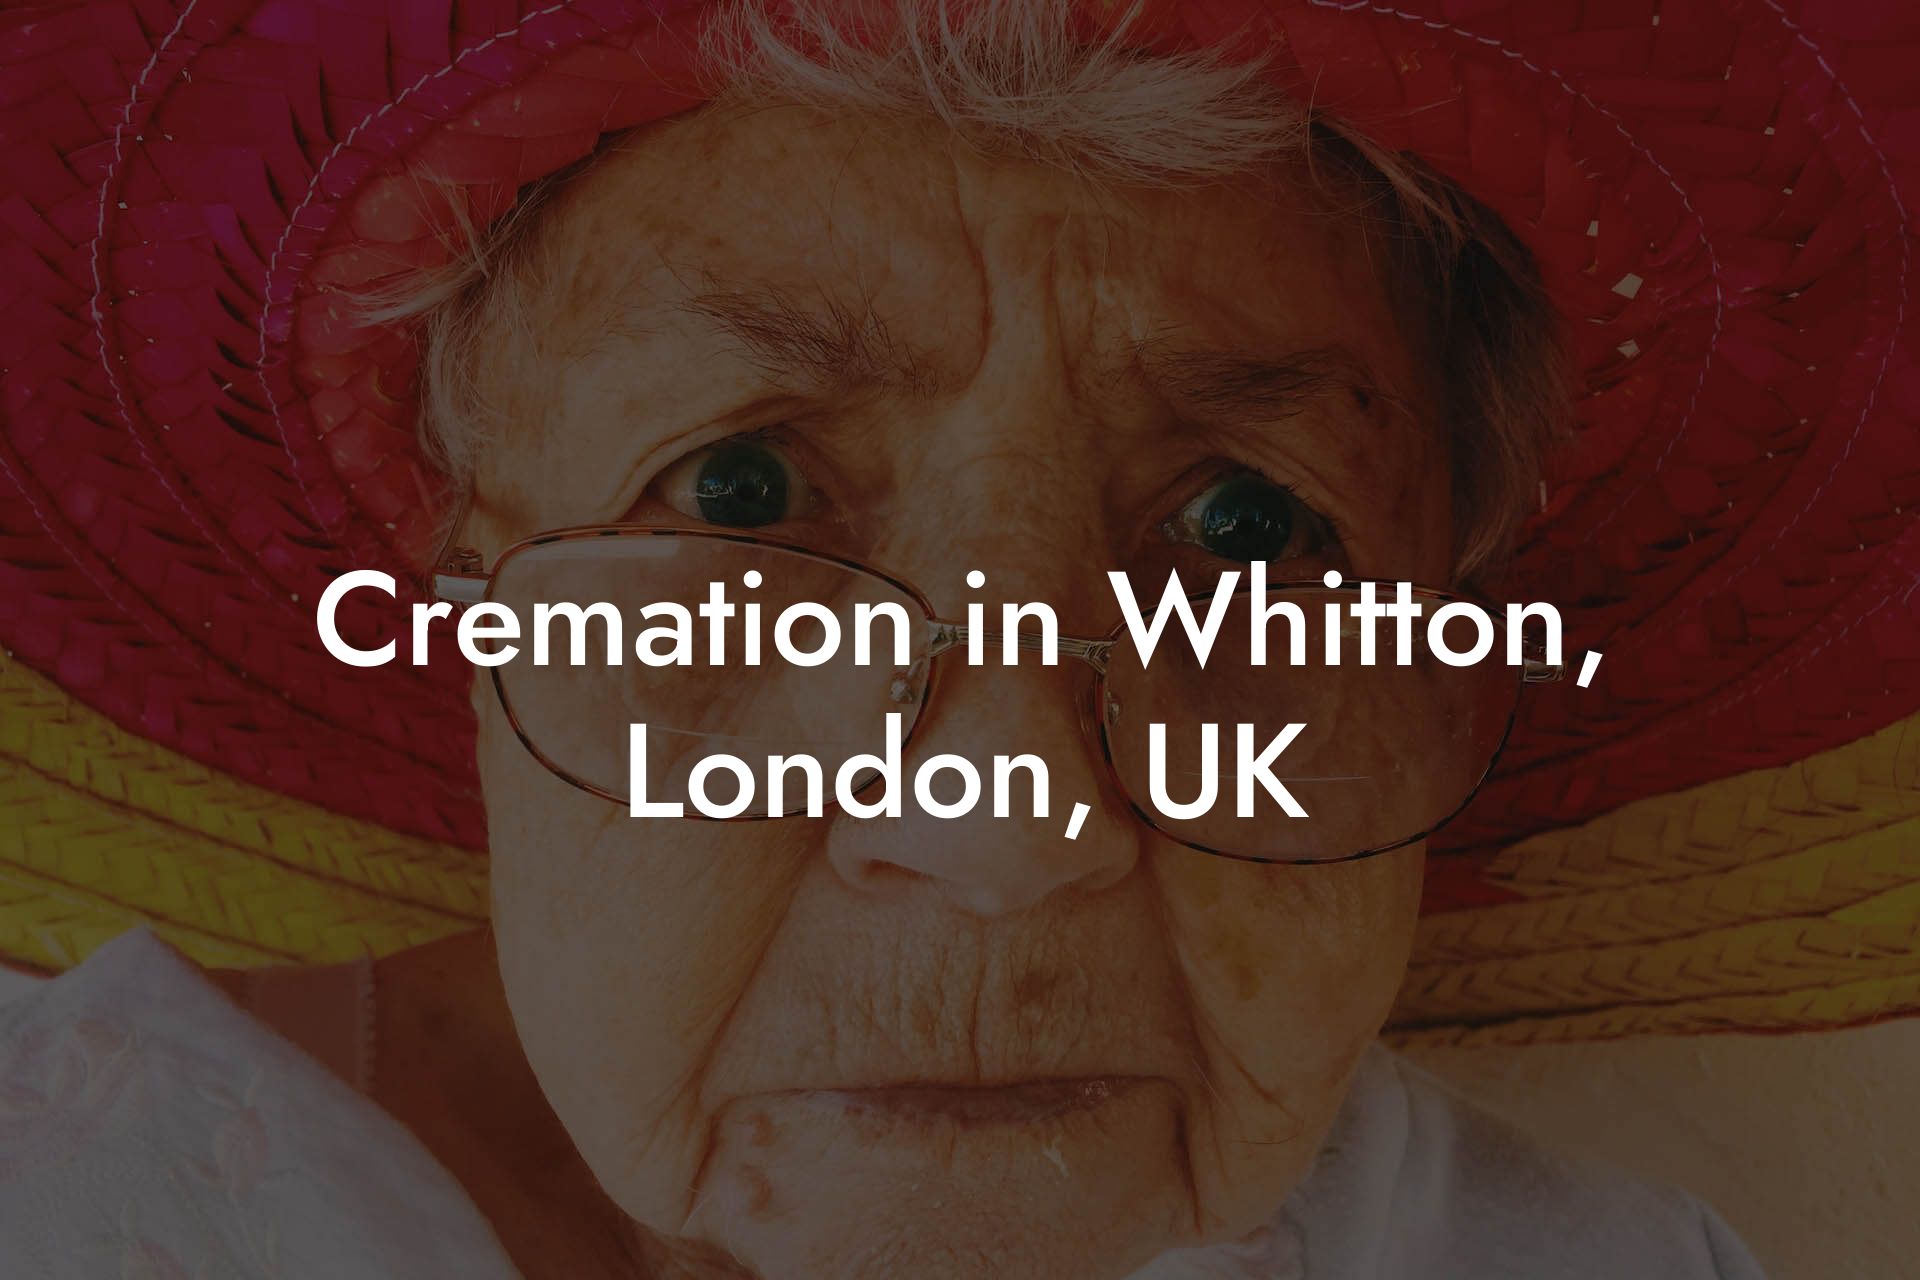 Cremation in Whitton, London, UK